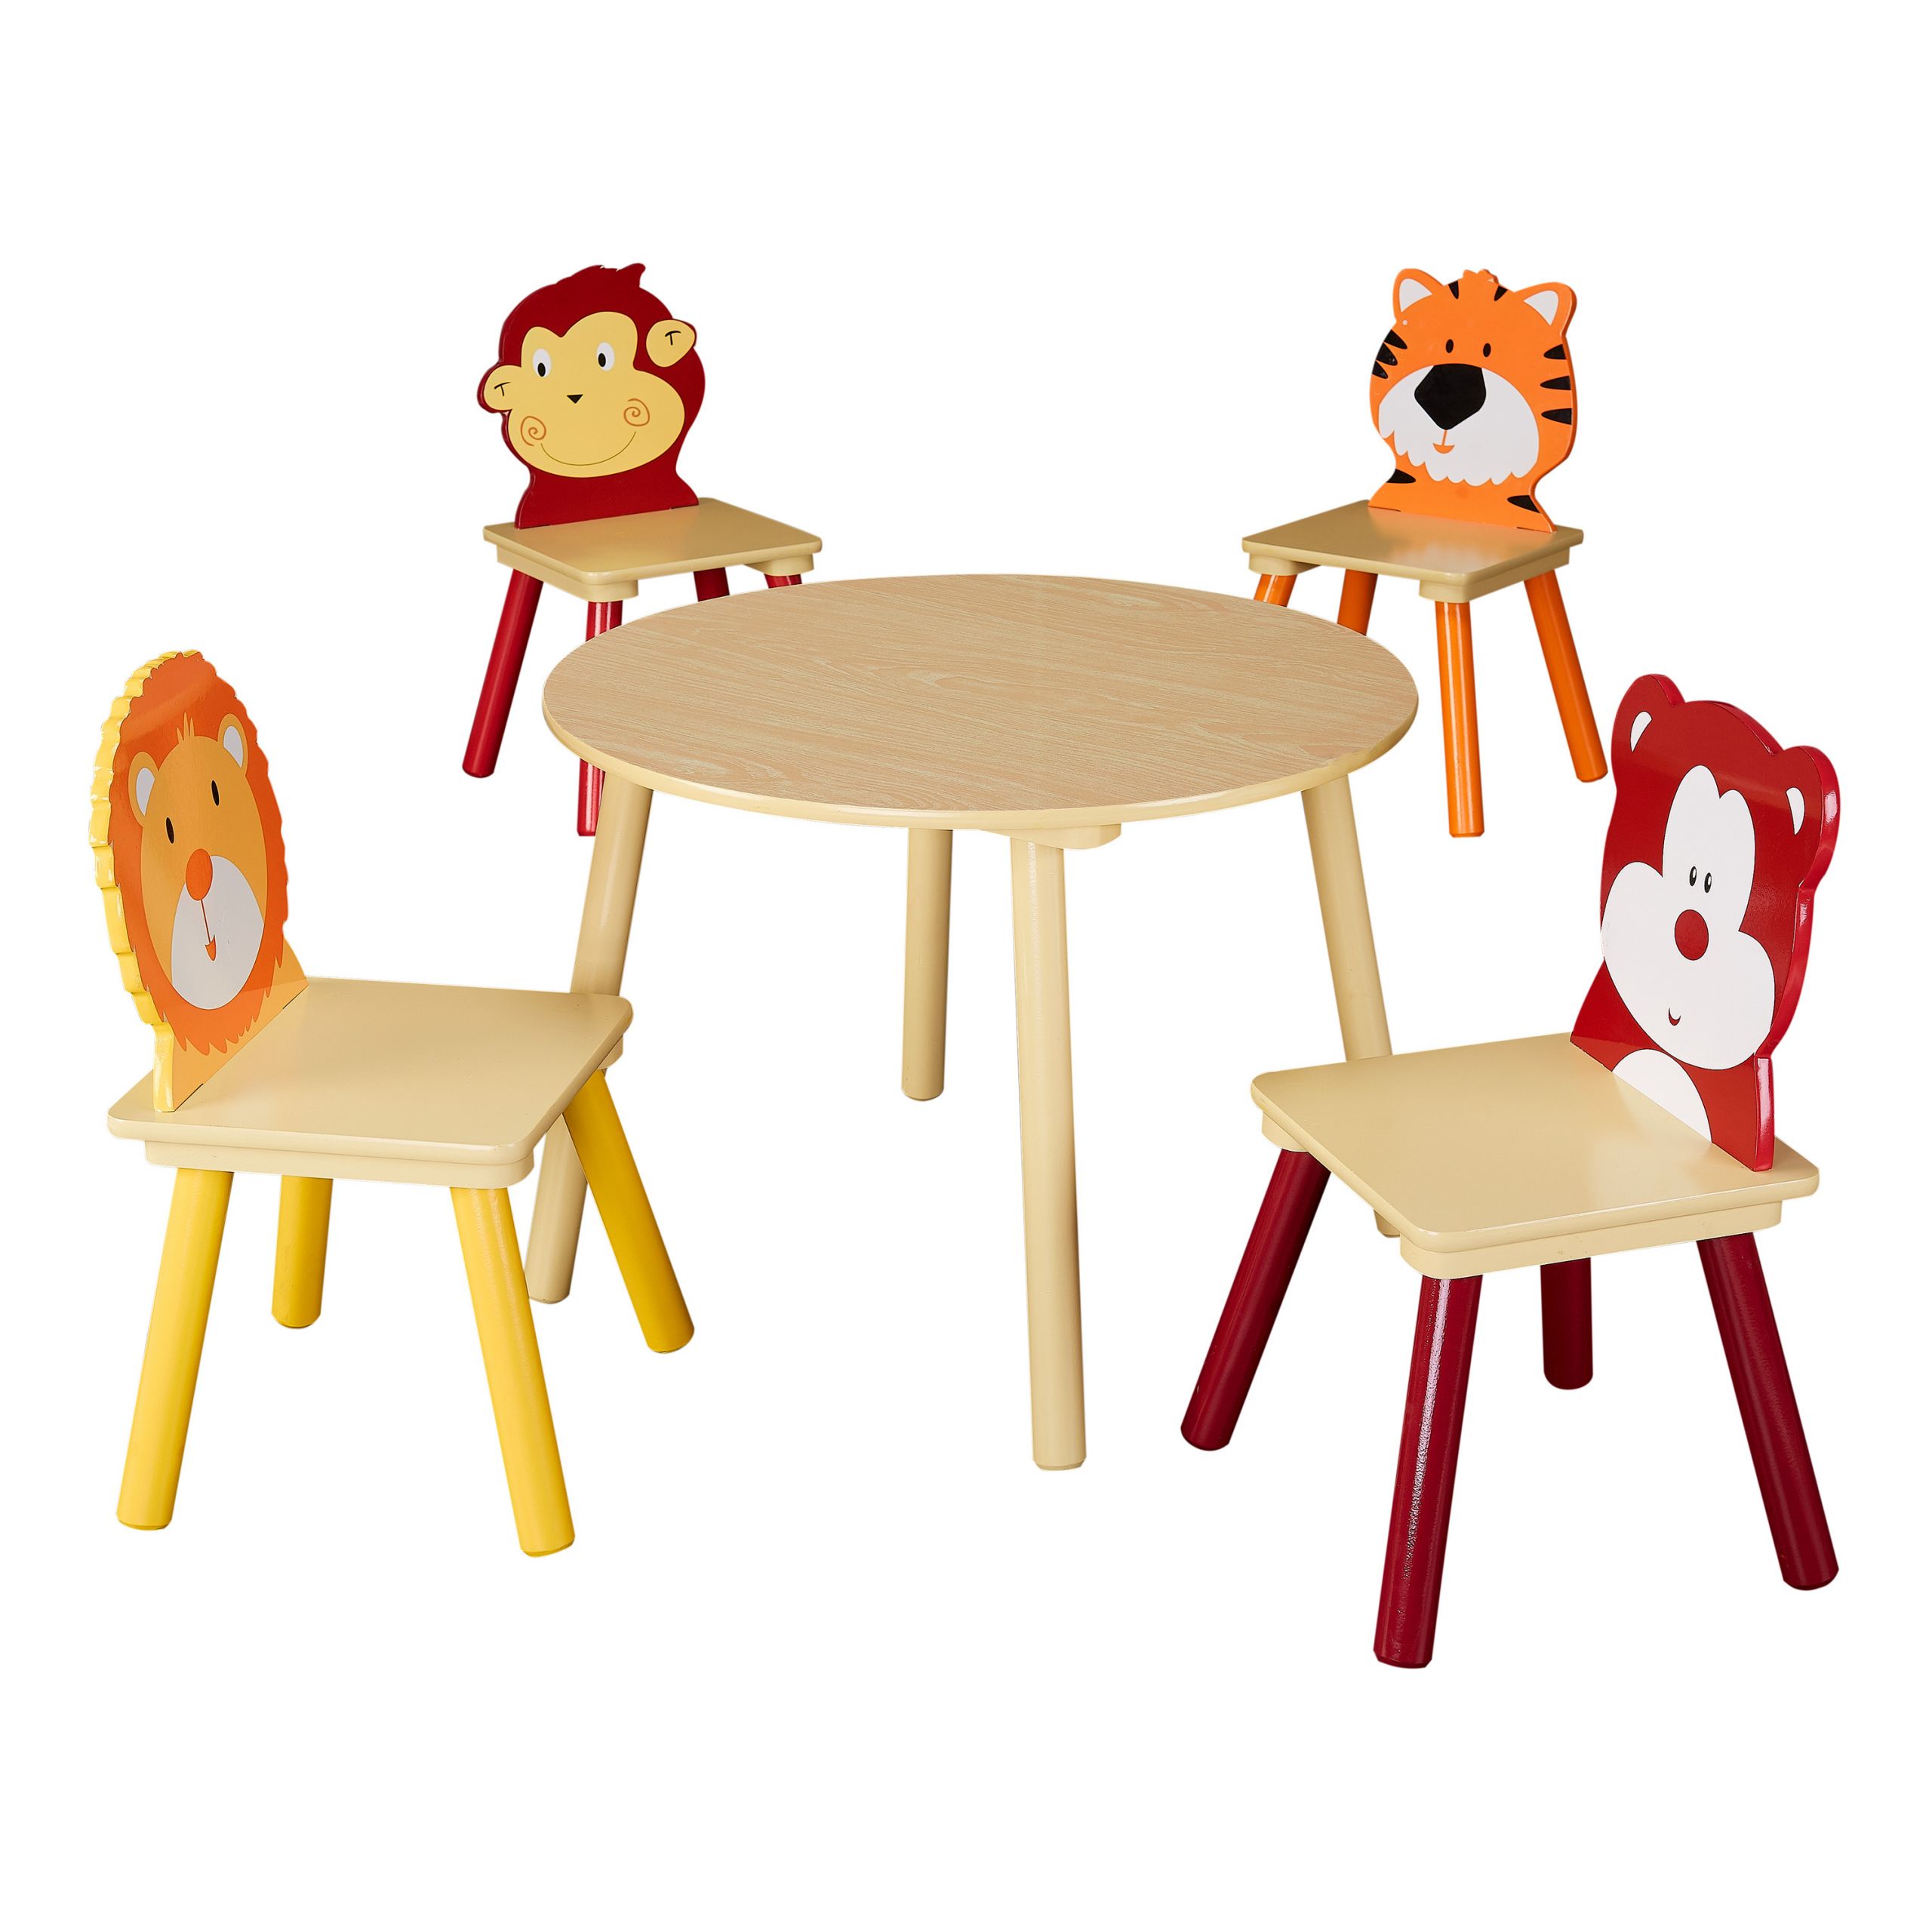 Kids Table Walmart
 Senda Kids Wooden Animals Table and Chairs Set 5 Piece